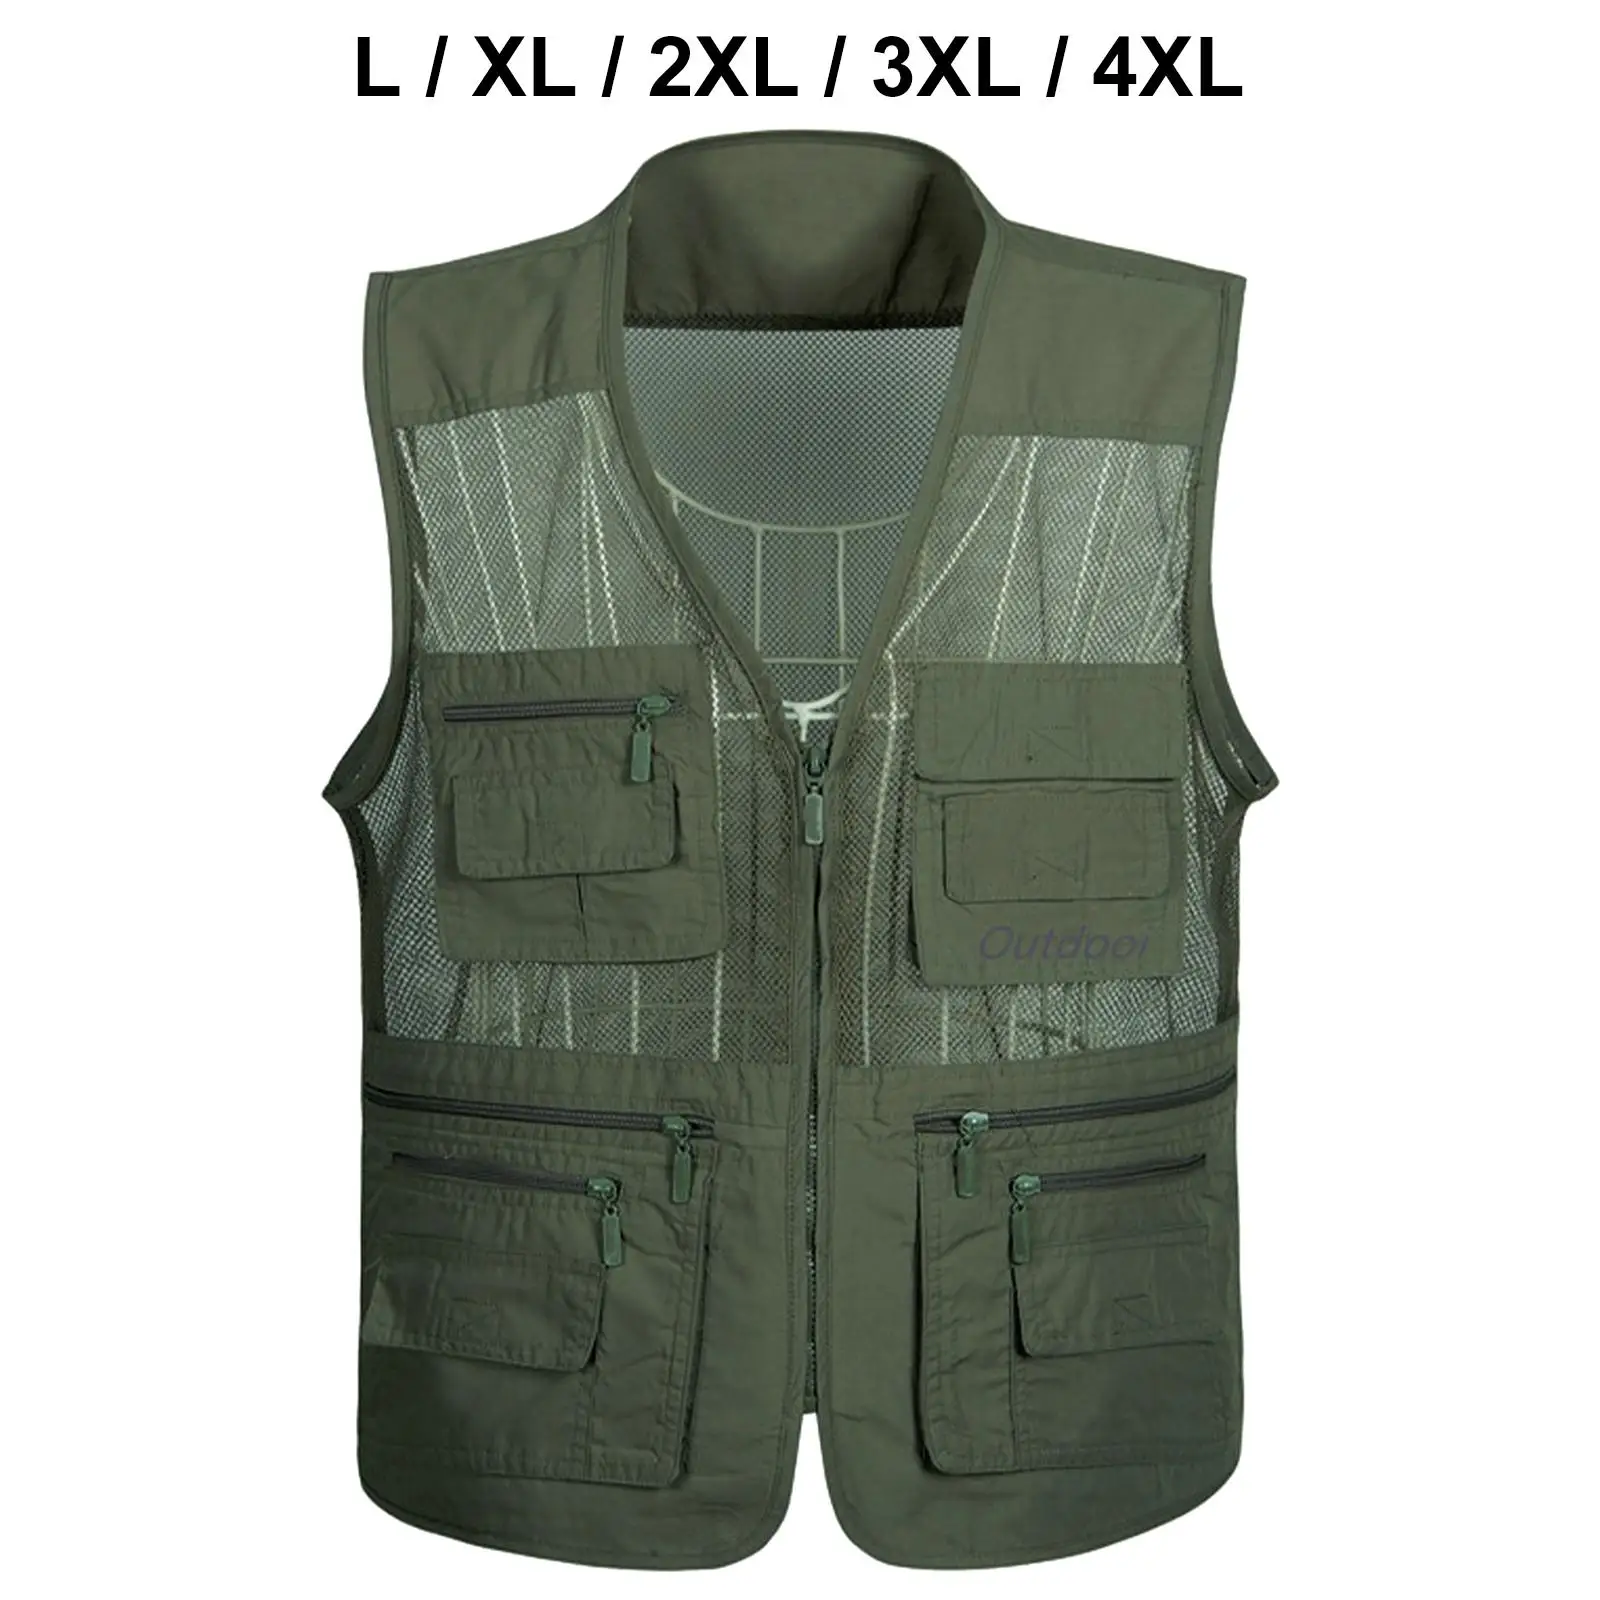 Outdoor Fishing Mesh Vest Breathable Fishing Jacket Utility Vest for Hiking